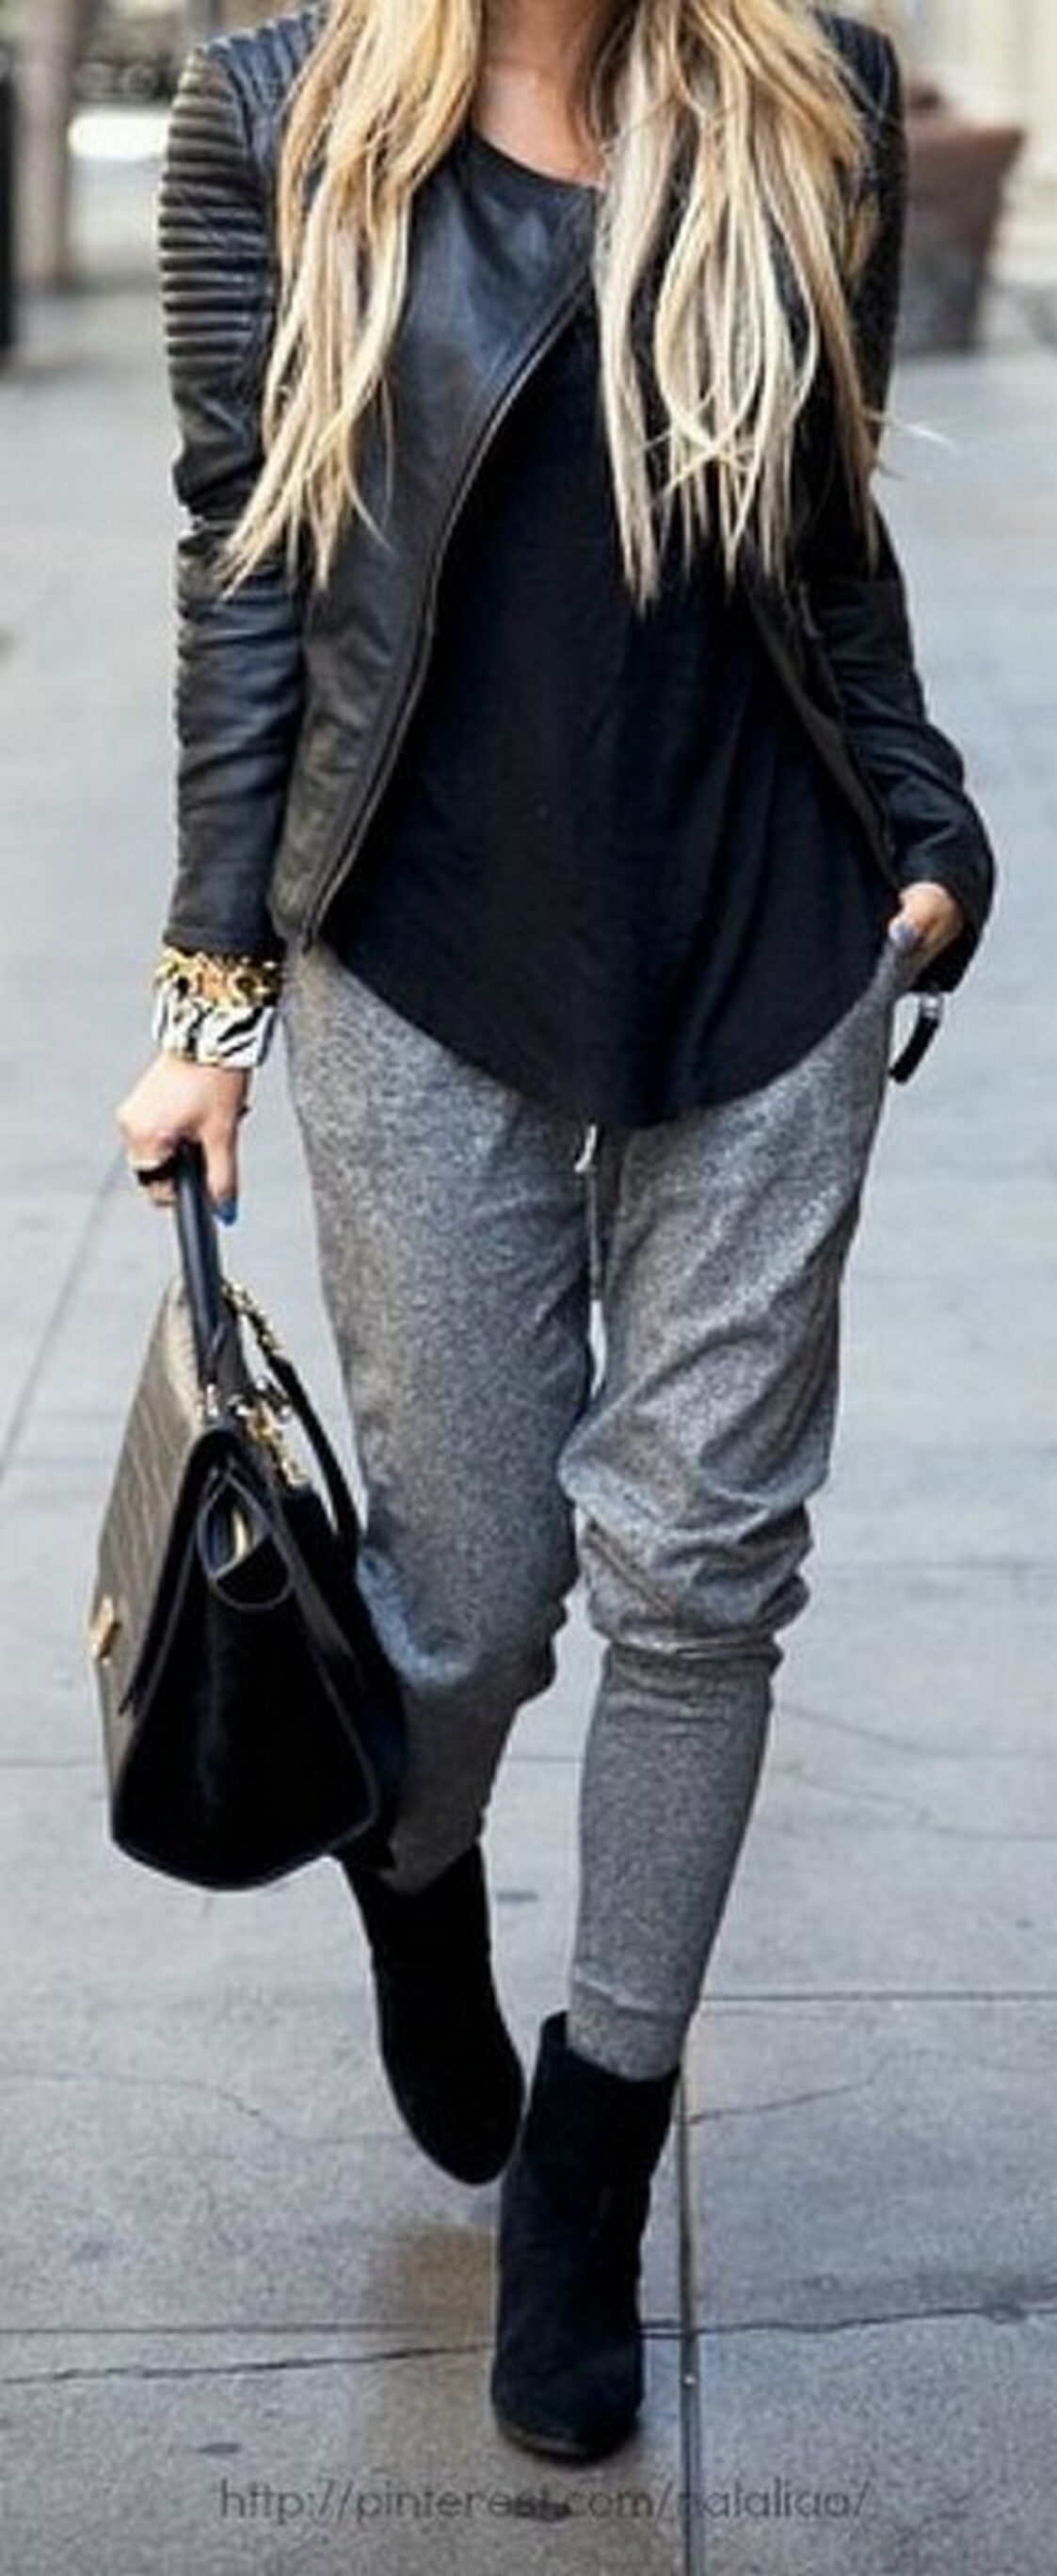 T-Shirt, Leather Jacket, And Gray Jogger For Women